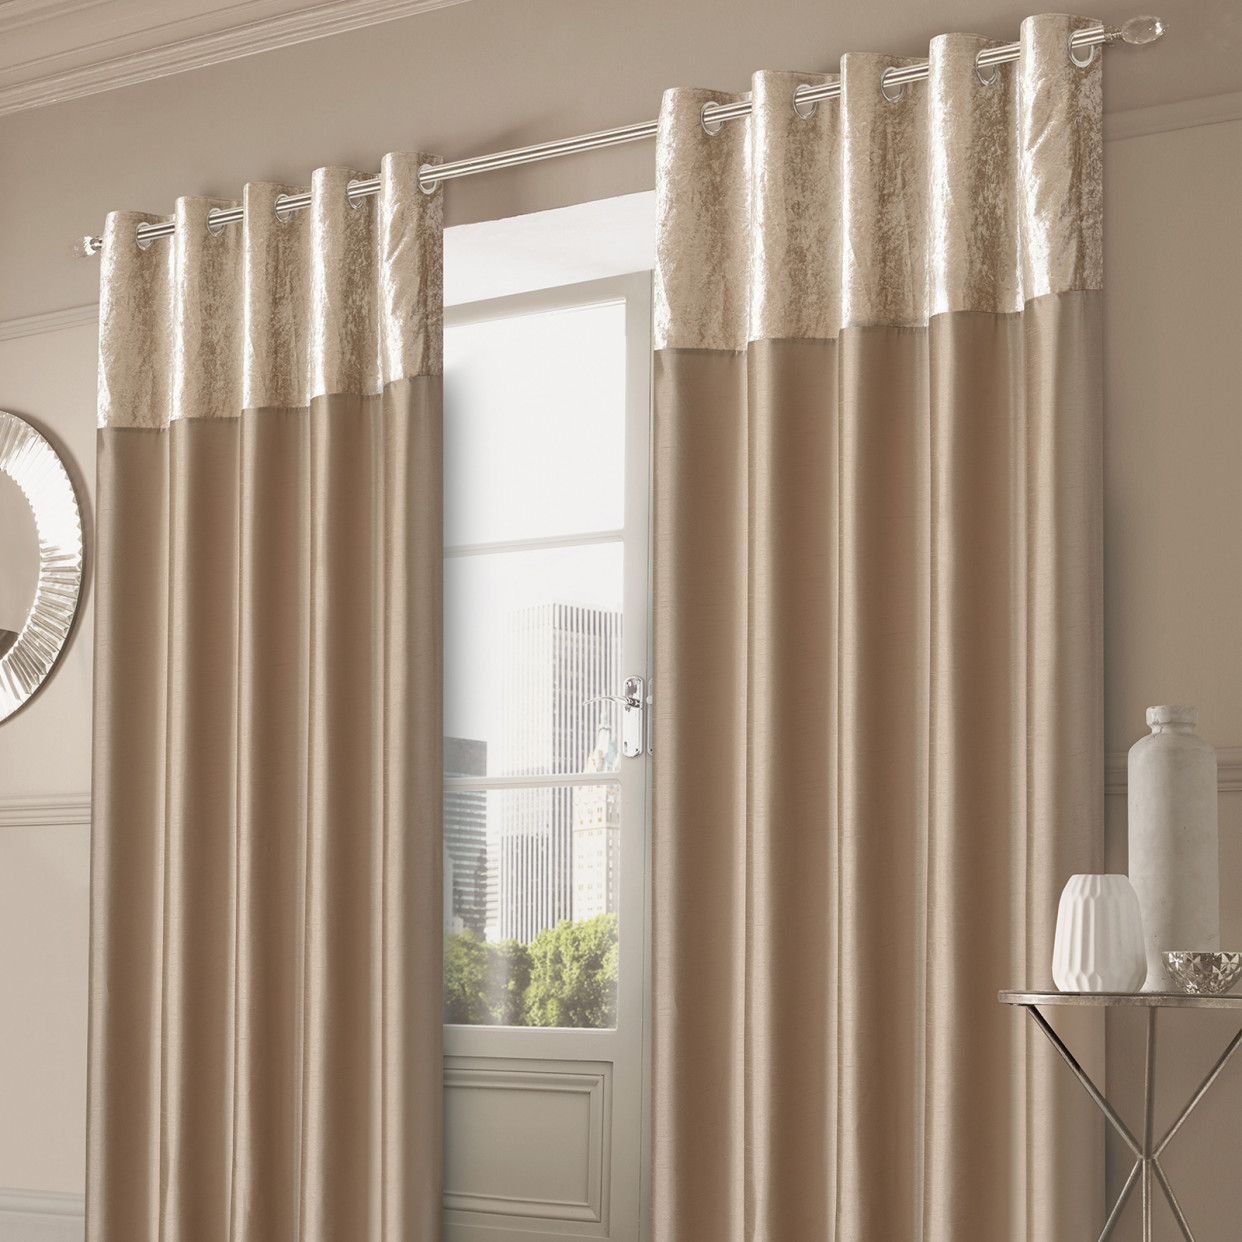 Sienna Home Crushed Velvet Band Eyelet Curtains, Gold - 46"x54">